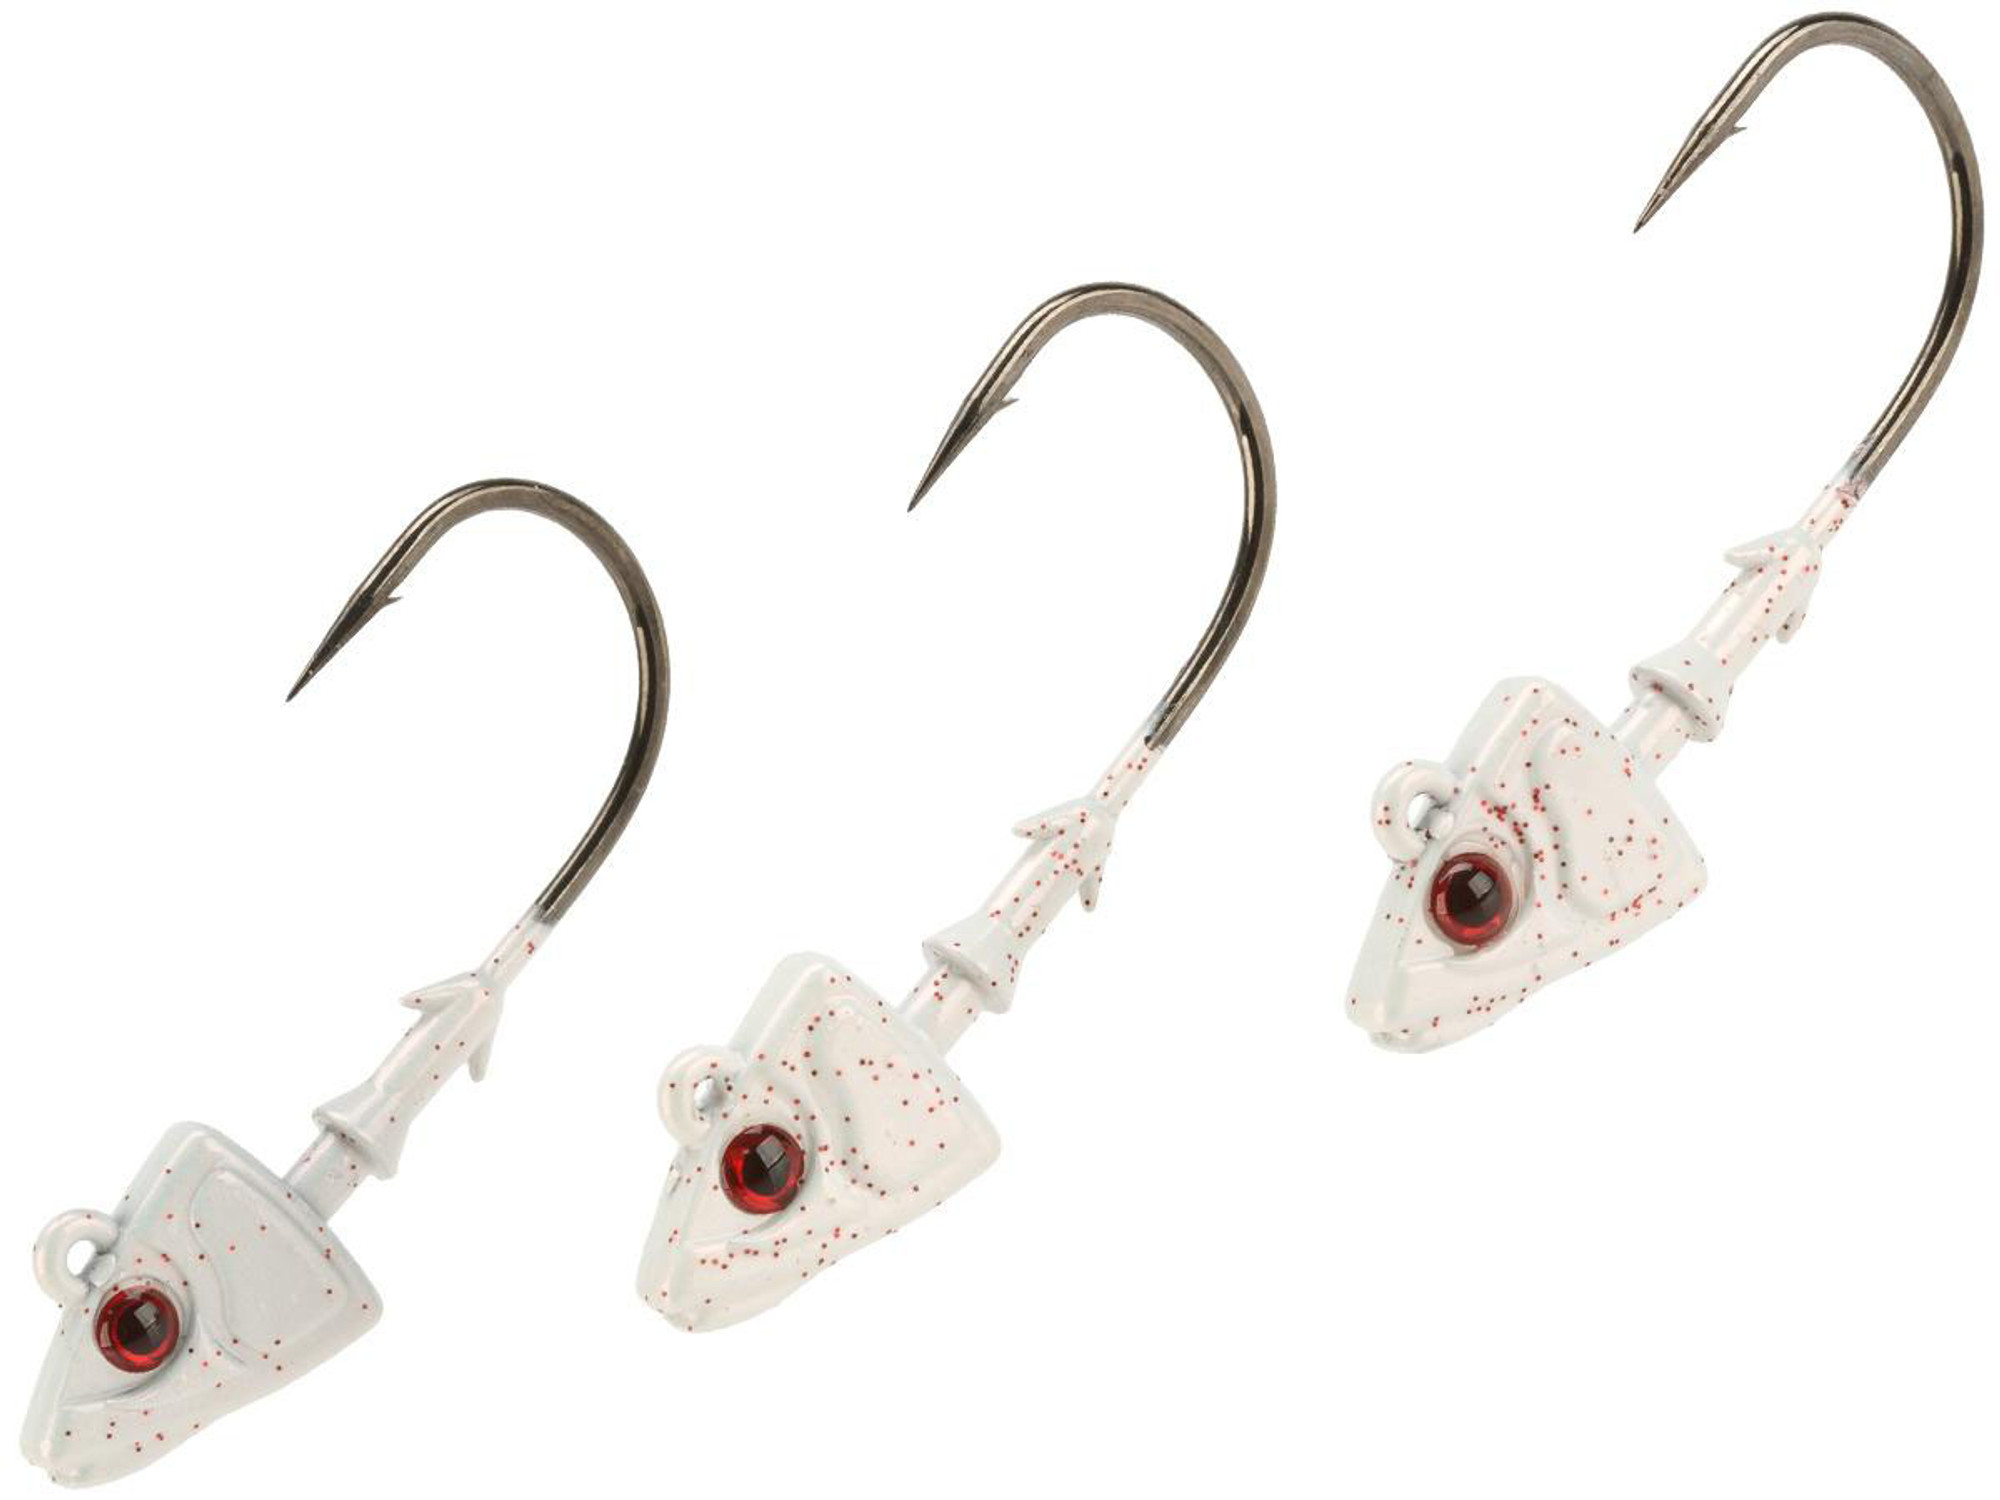 Mustad Shad/Darter Head 1/2 OZ 2X Strong - Pack of 3 (Color: Pearl UV with Red Eyes / Size 4/0)